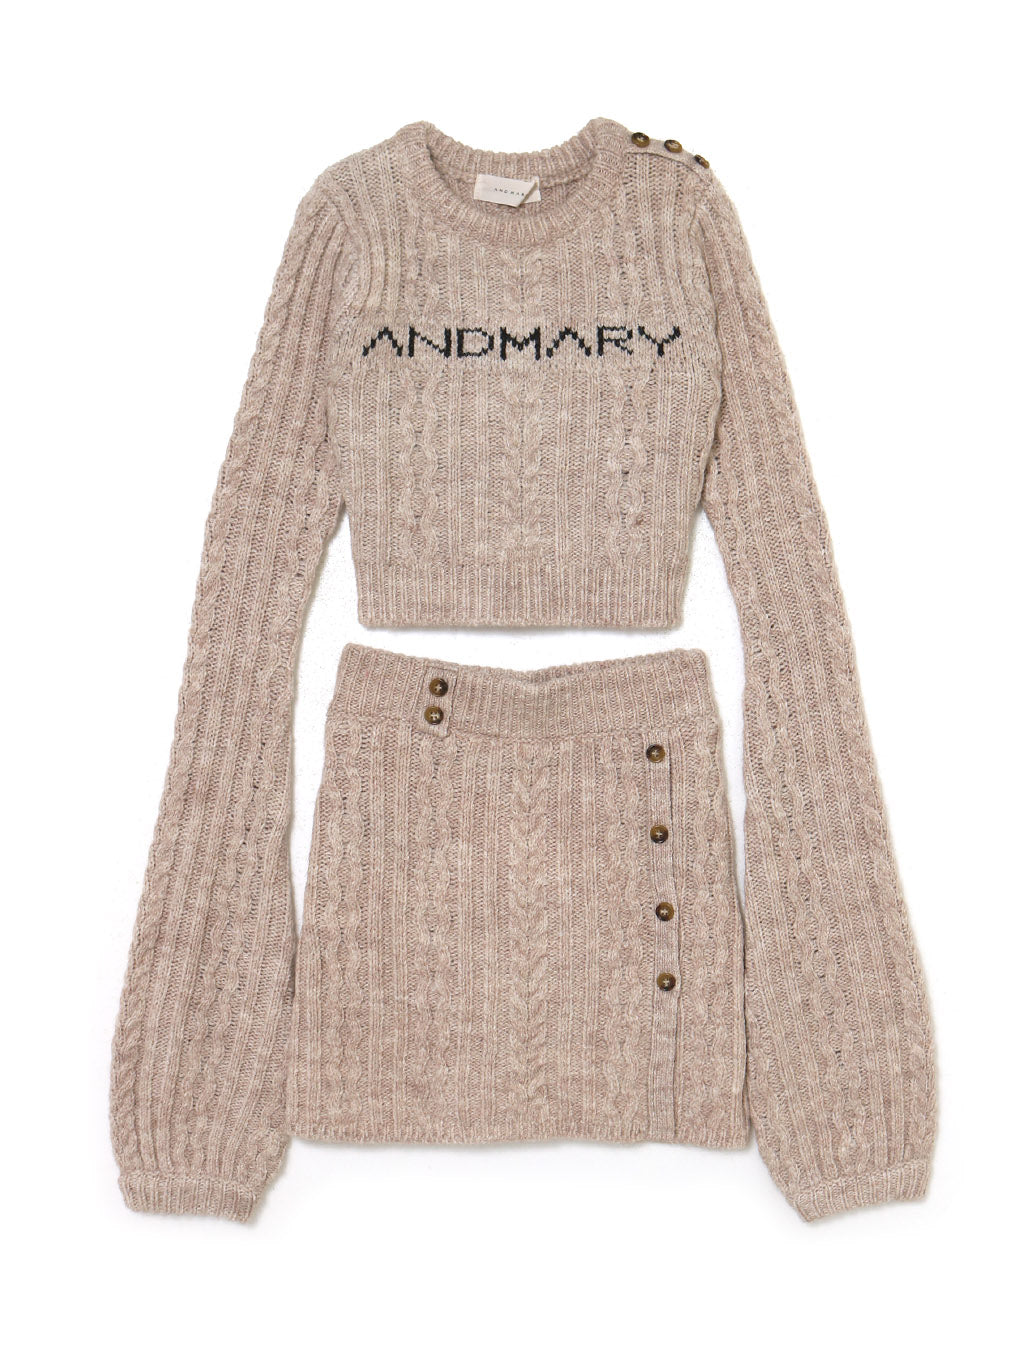 andmary Marie knit set up